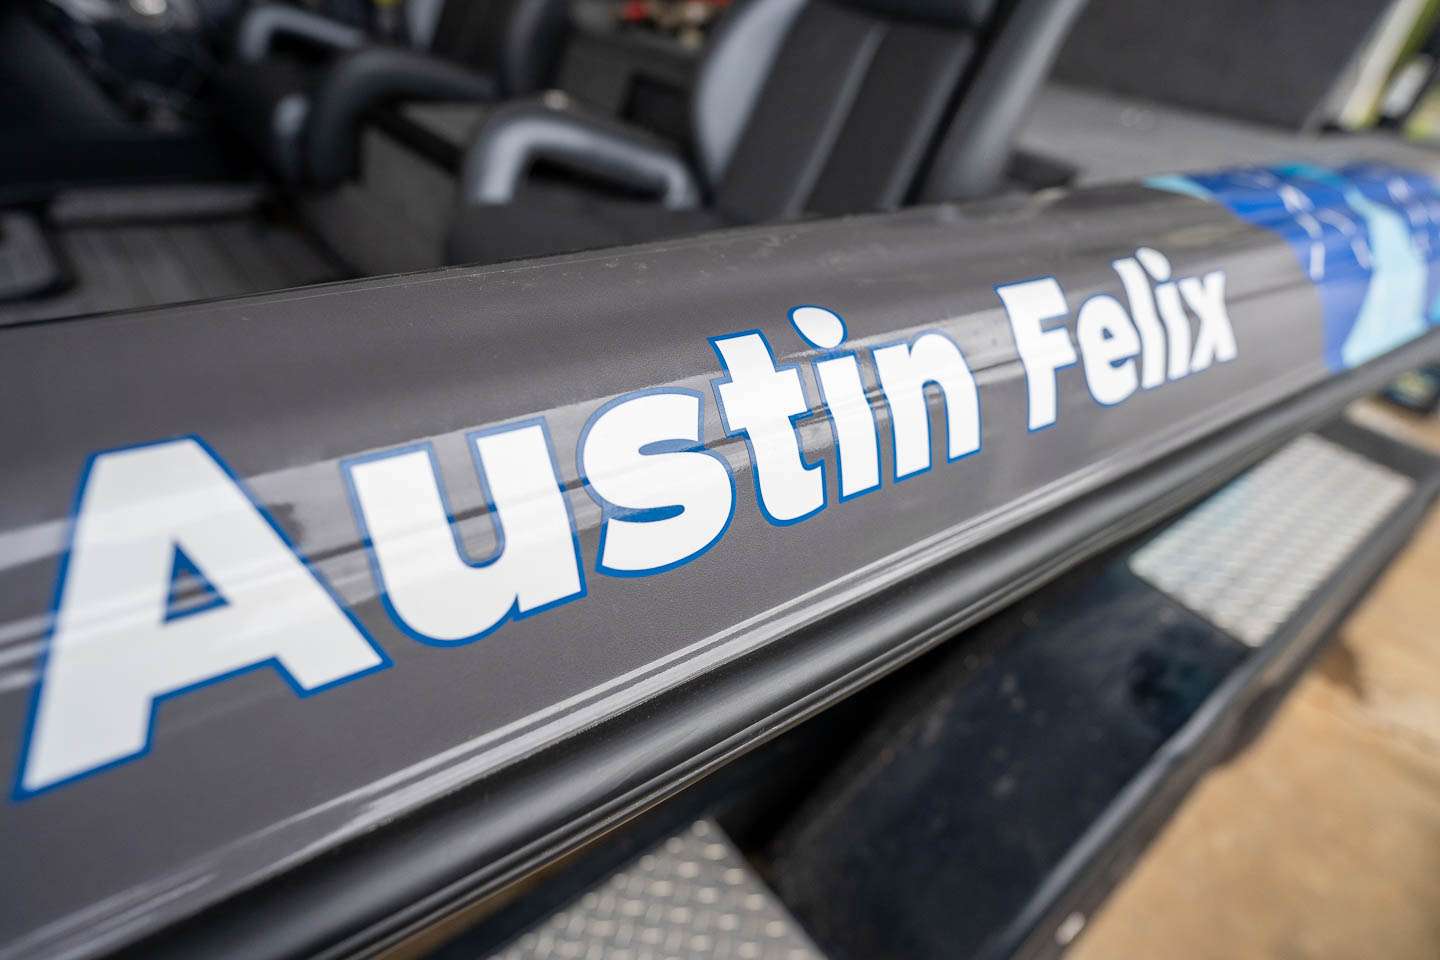 Like any Elite pro, Austin's name is on his boat. 